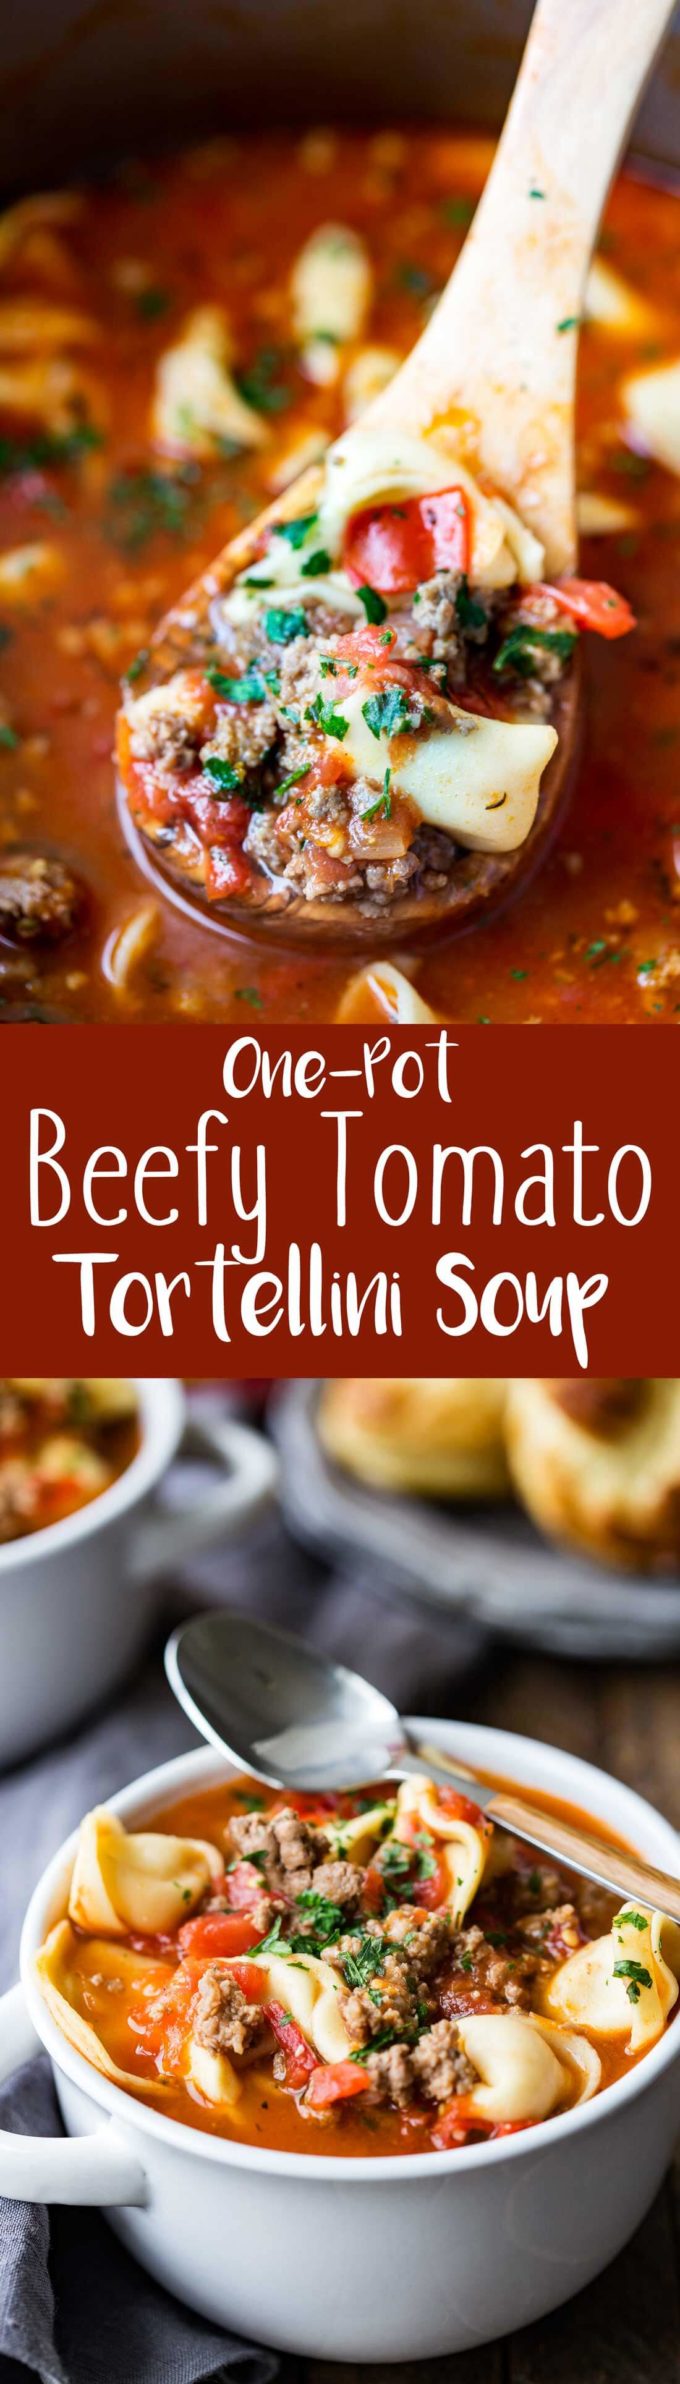 Hearty, beefy, tomato tortellini soup is the ideal comfort soup this winter! 